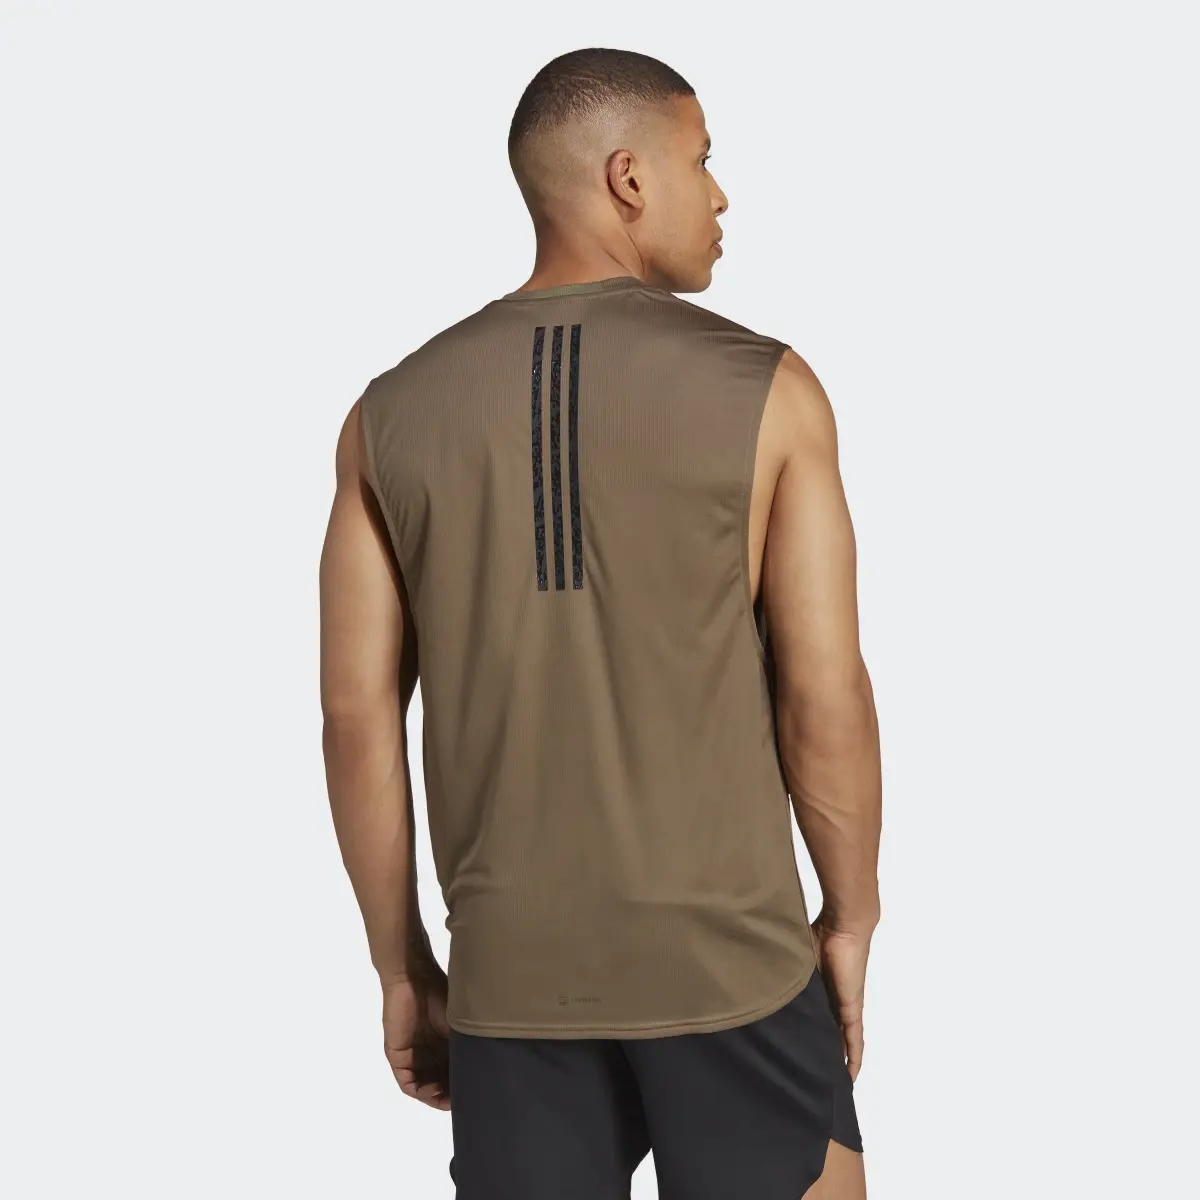 Adidas HIIT Tank Top Curated By Cody Rigsby. 3